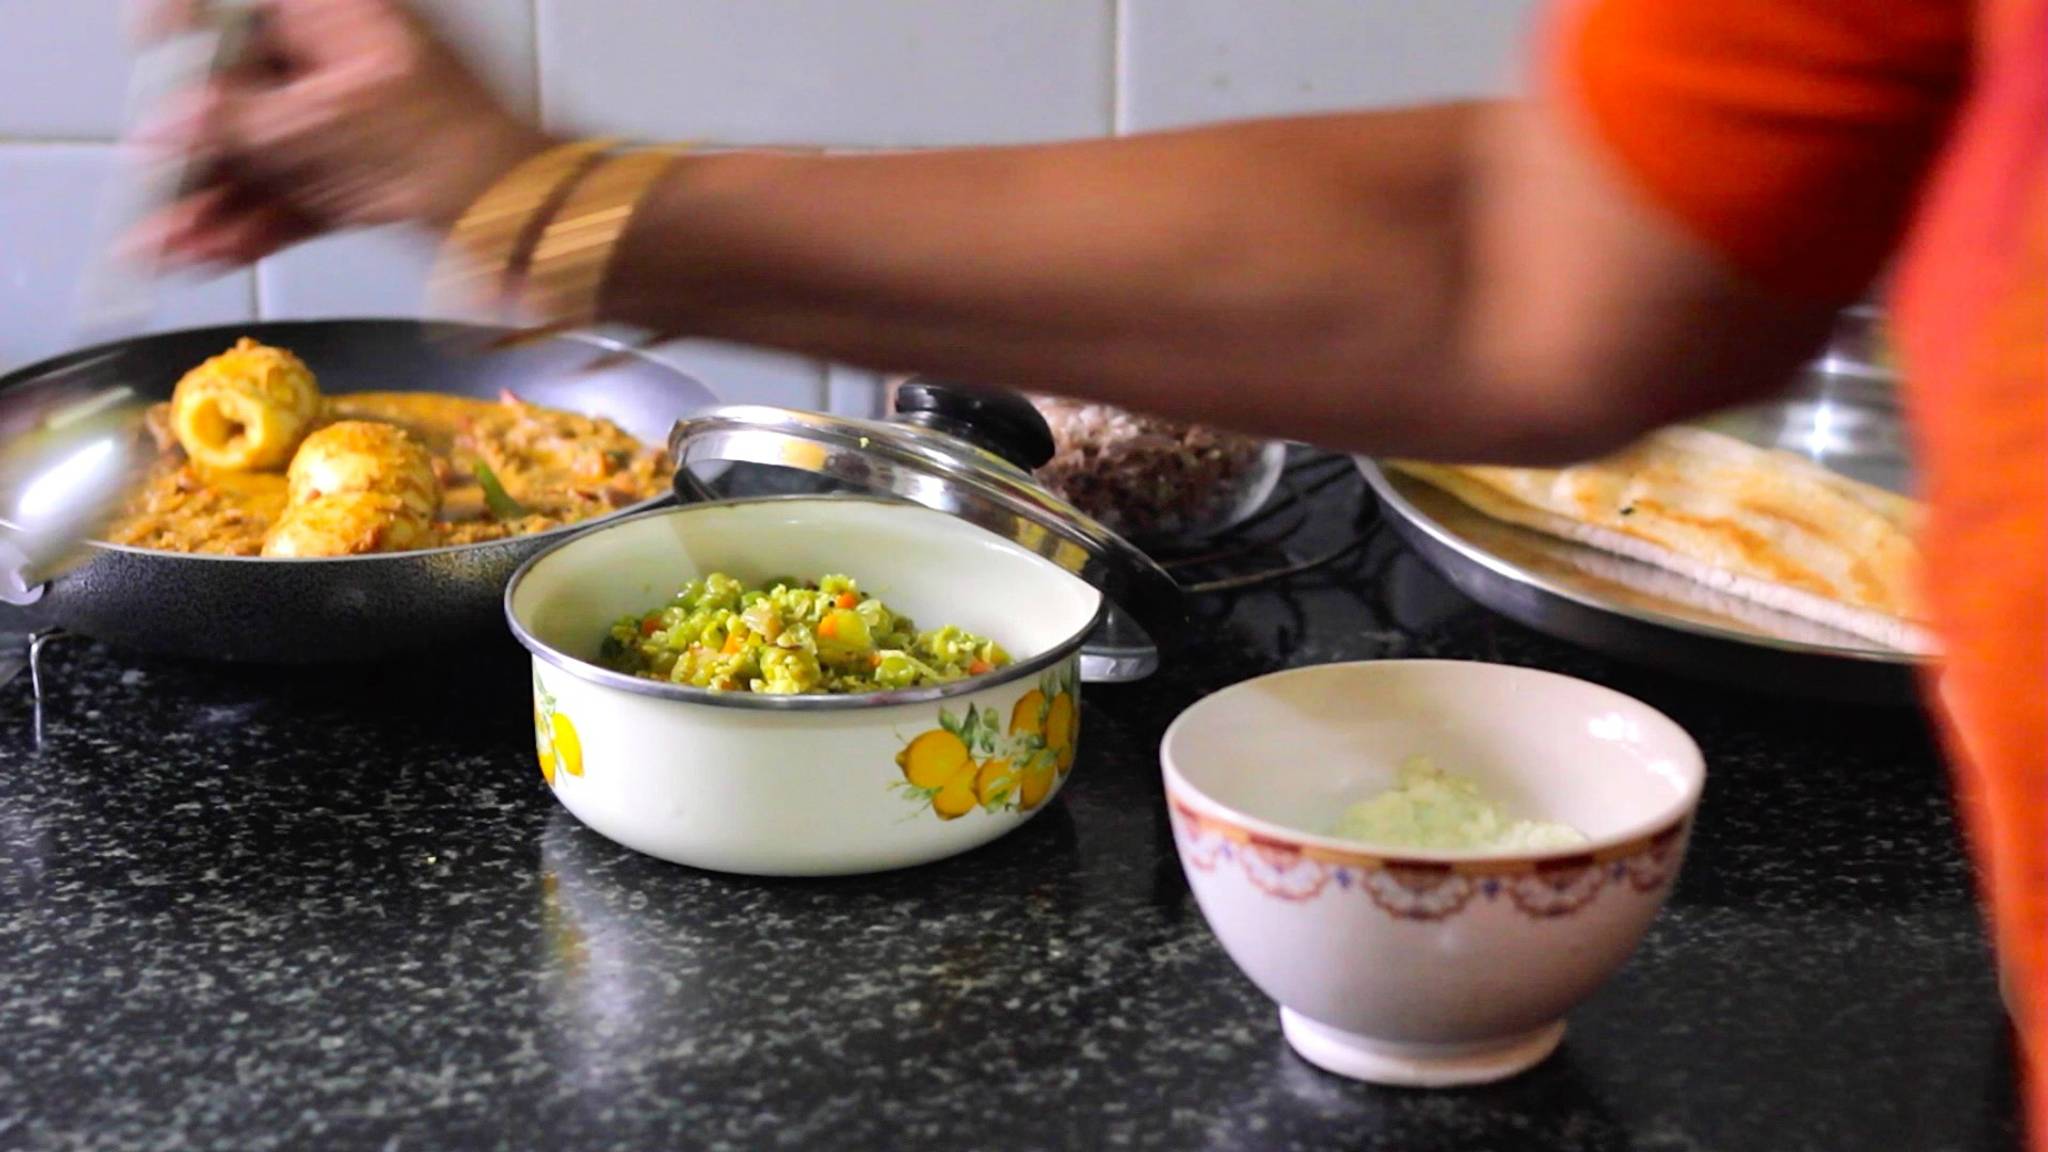 ZuperMeal delivers home-cooked Indian meals